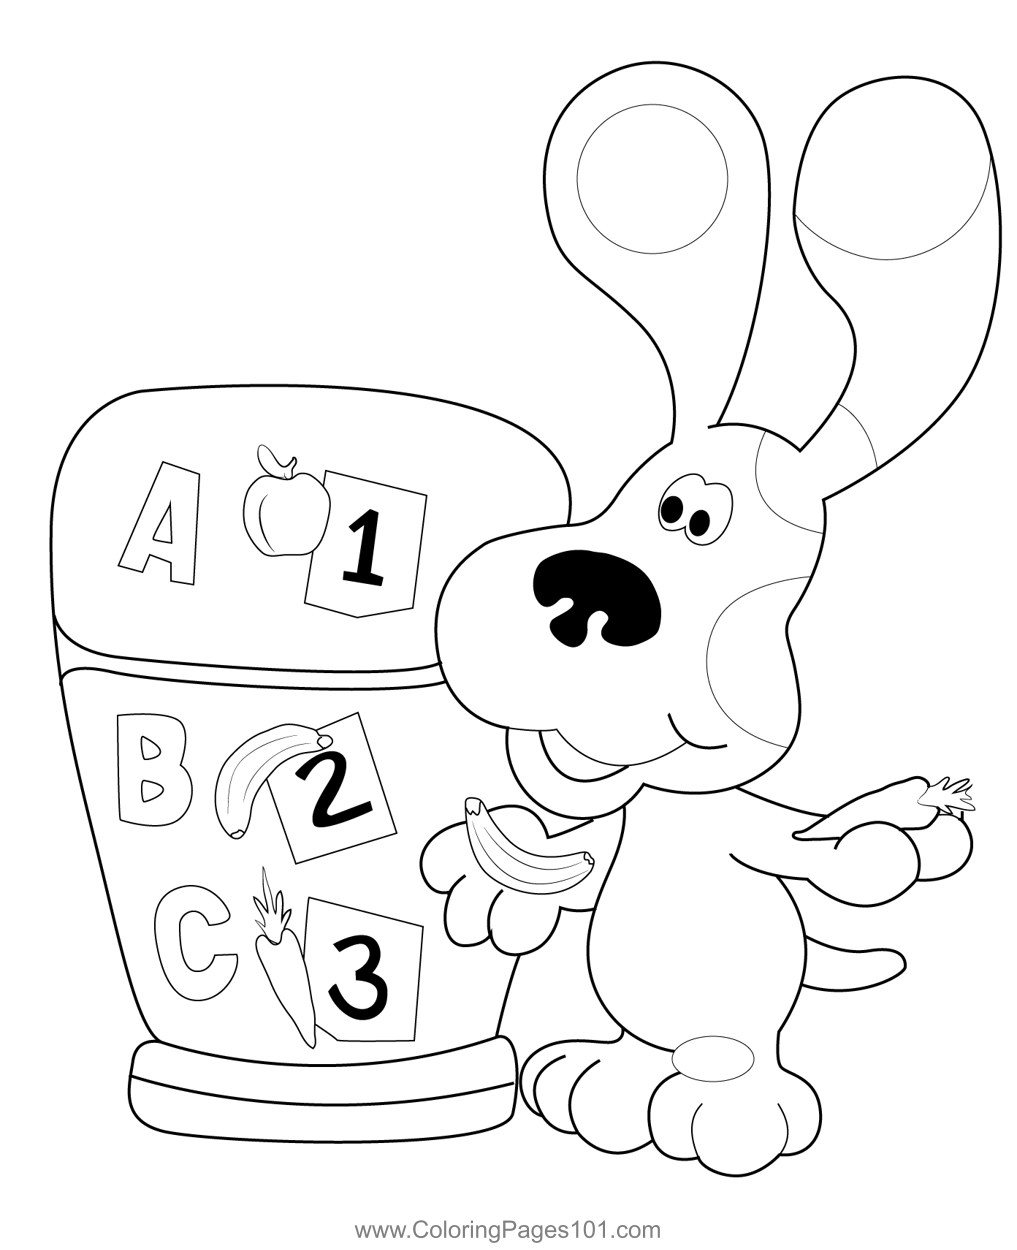 Blues Clues Playing Abc Game